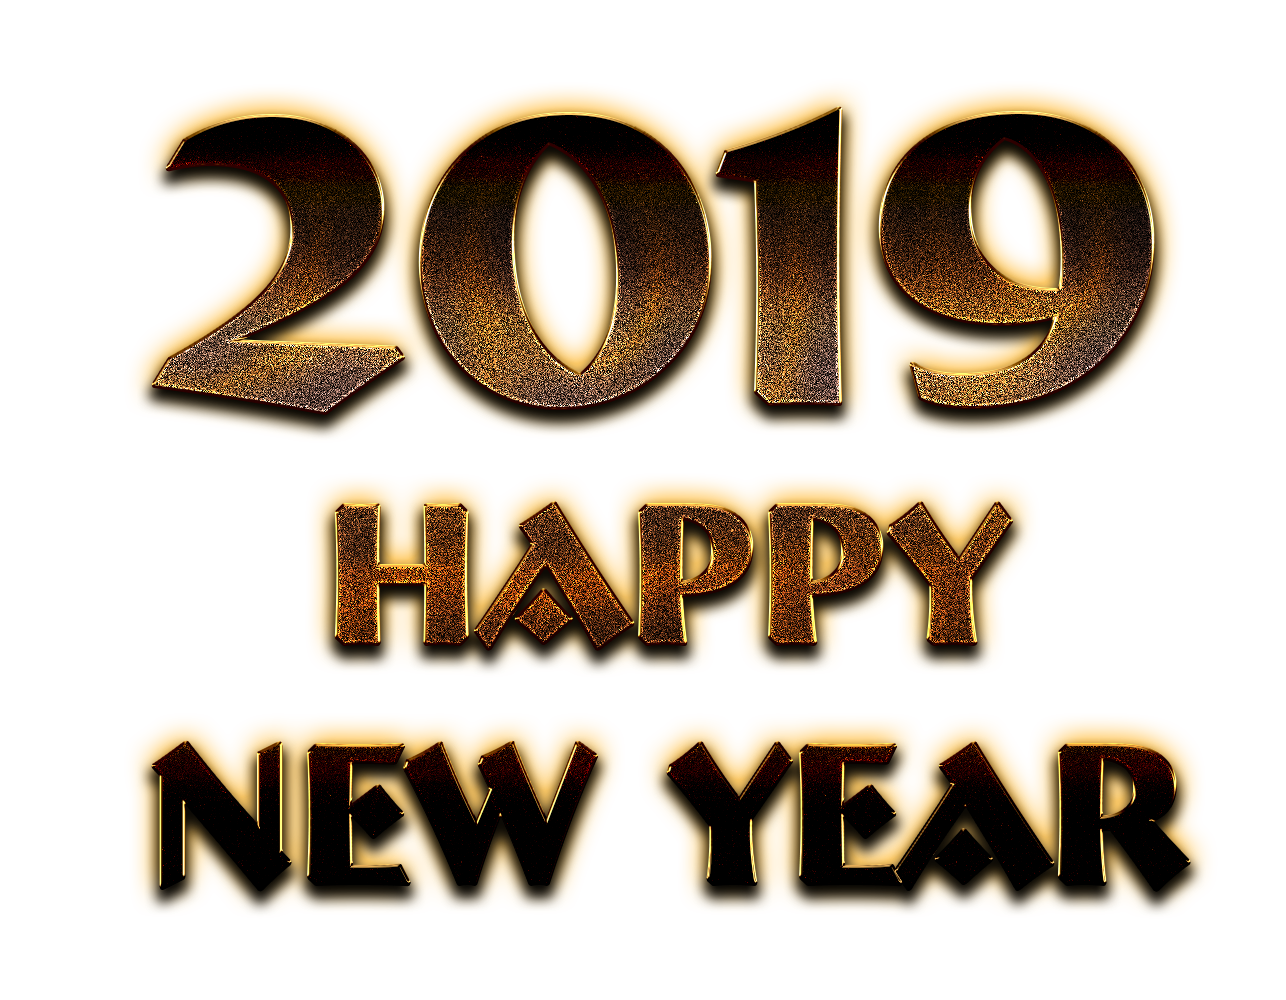 2019 Happy New Year PNG Pic